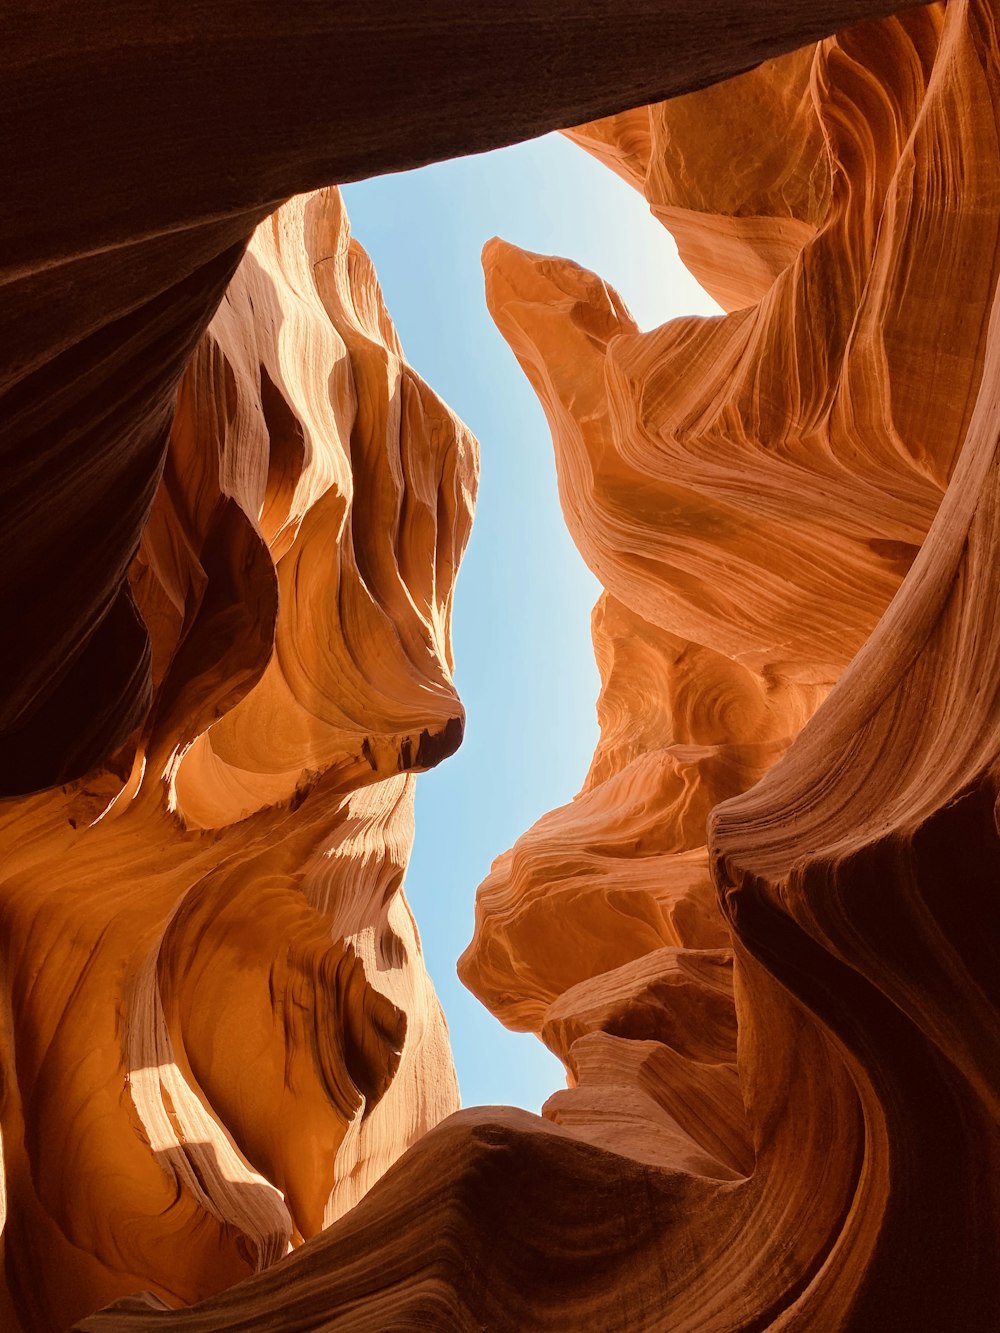 a close-up of some canyons